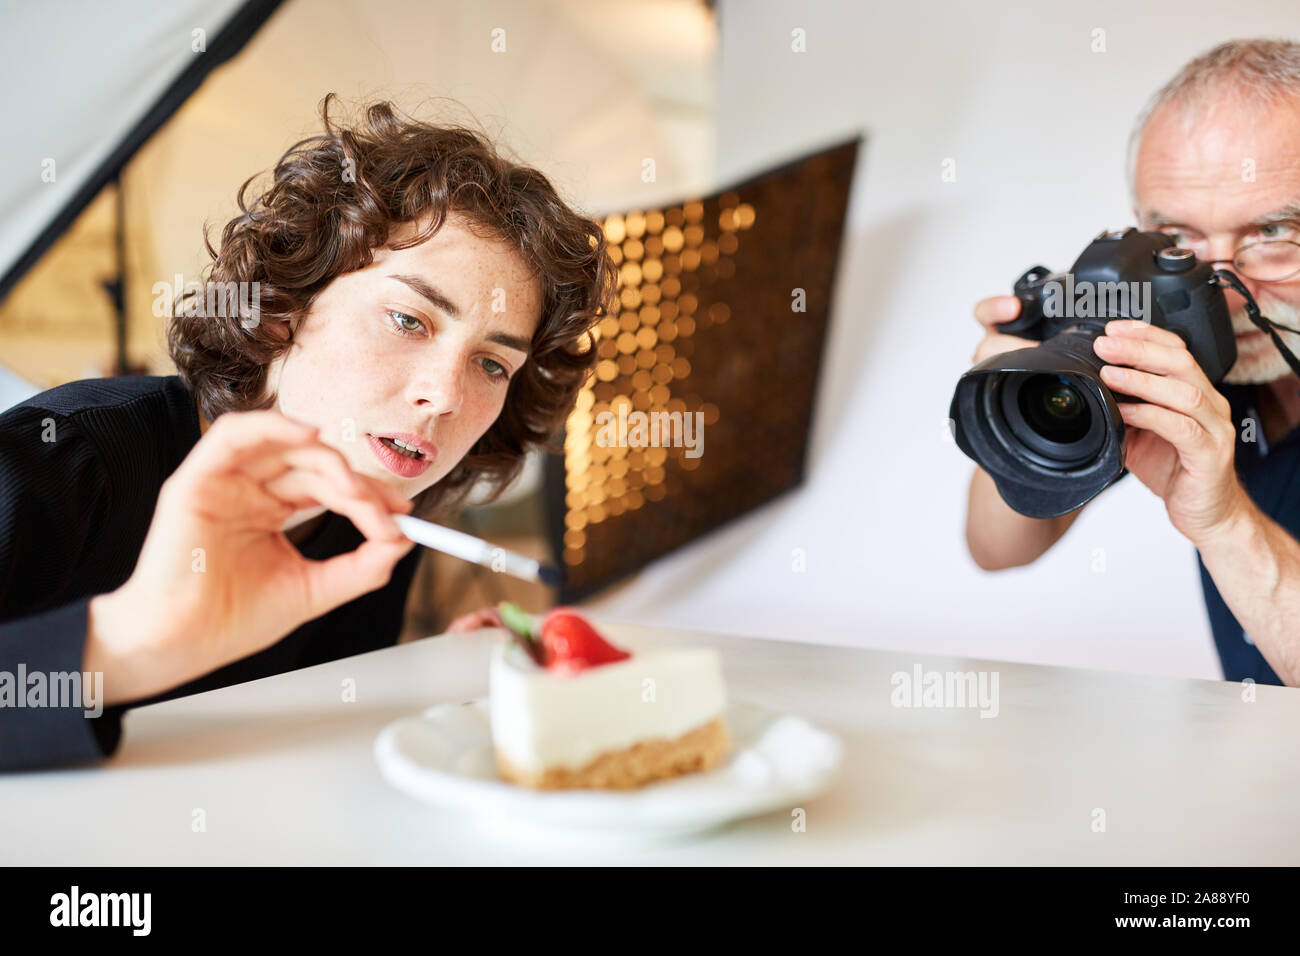 Food stylist and photographer with camera taking photos of food Stock Photo